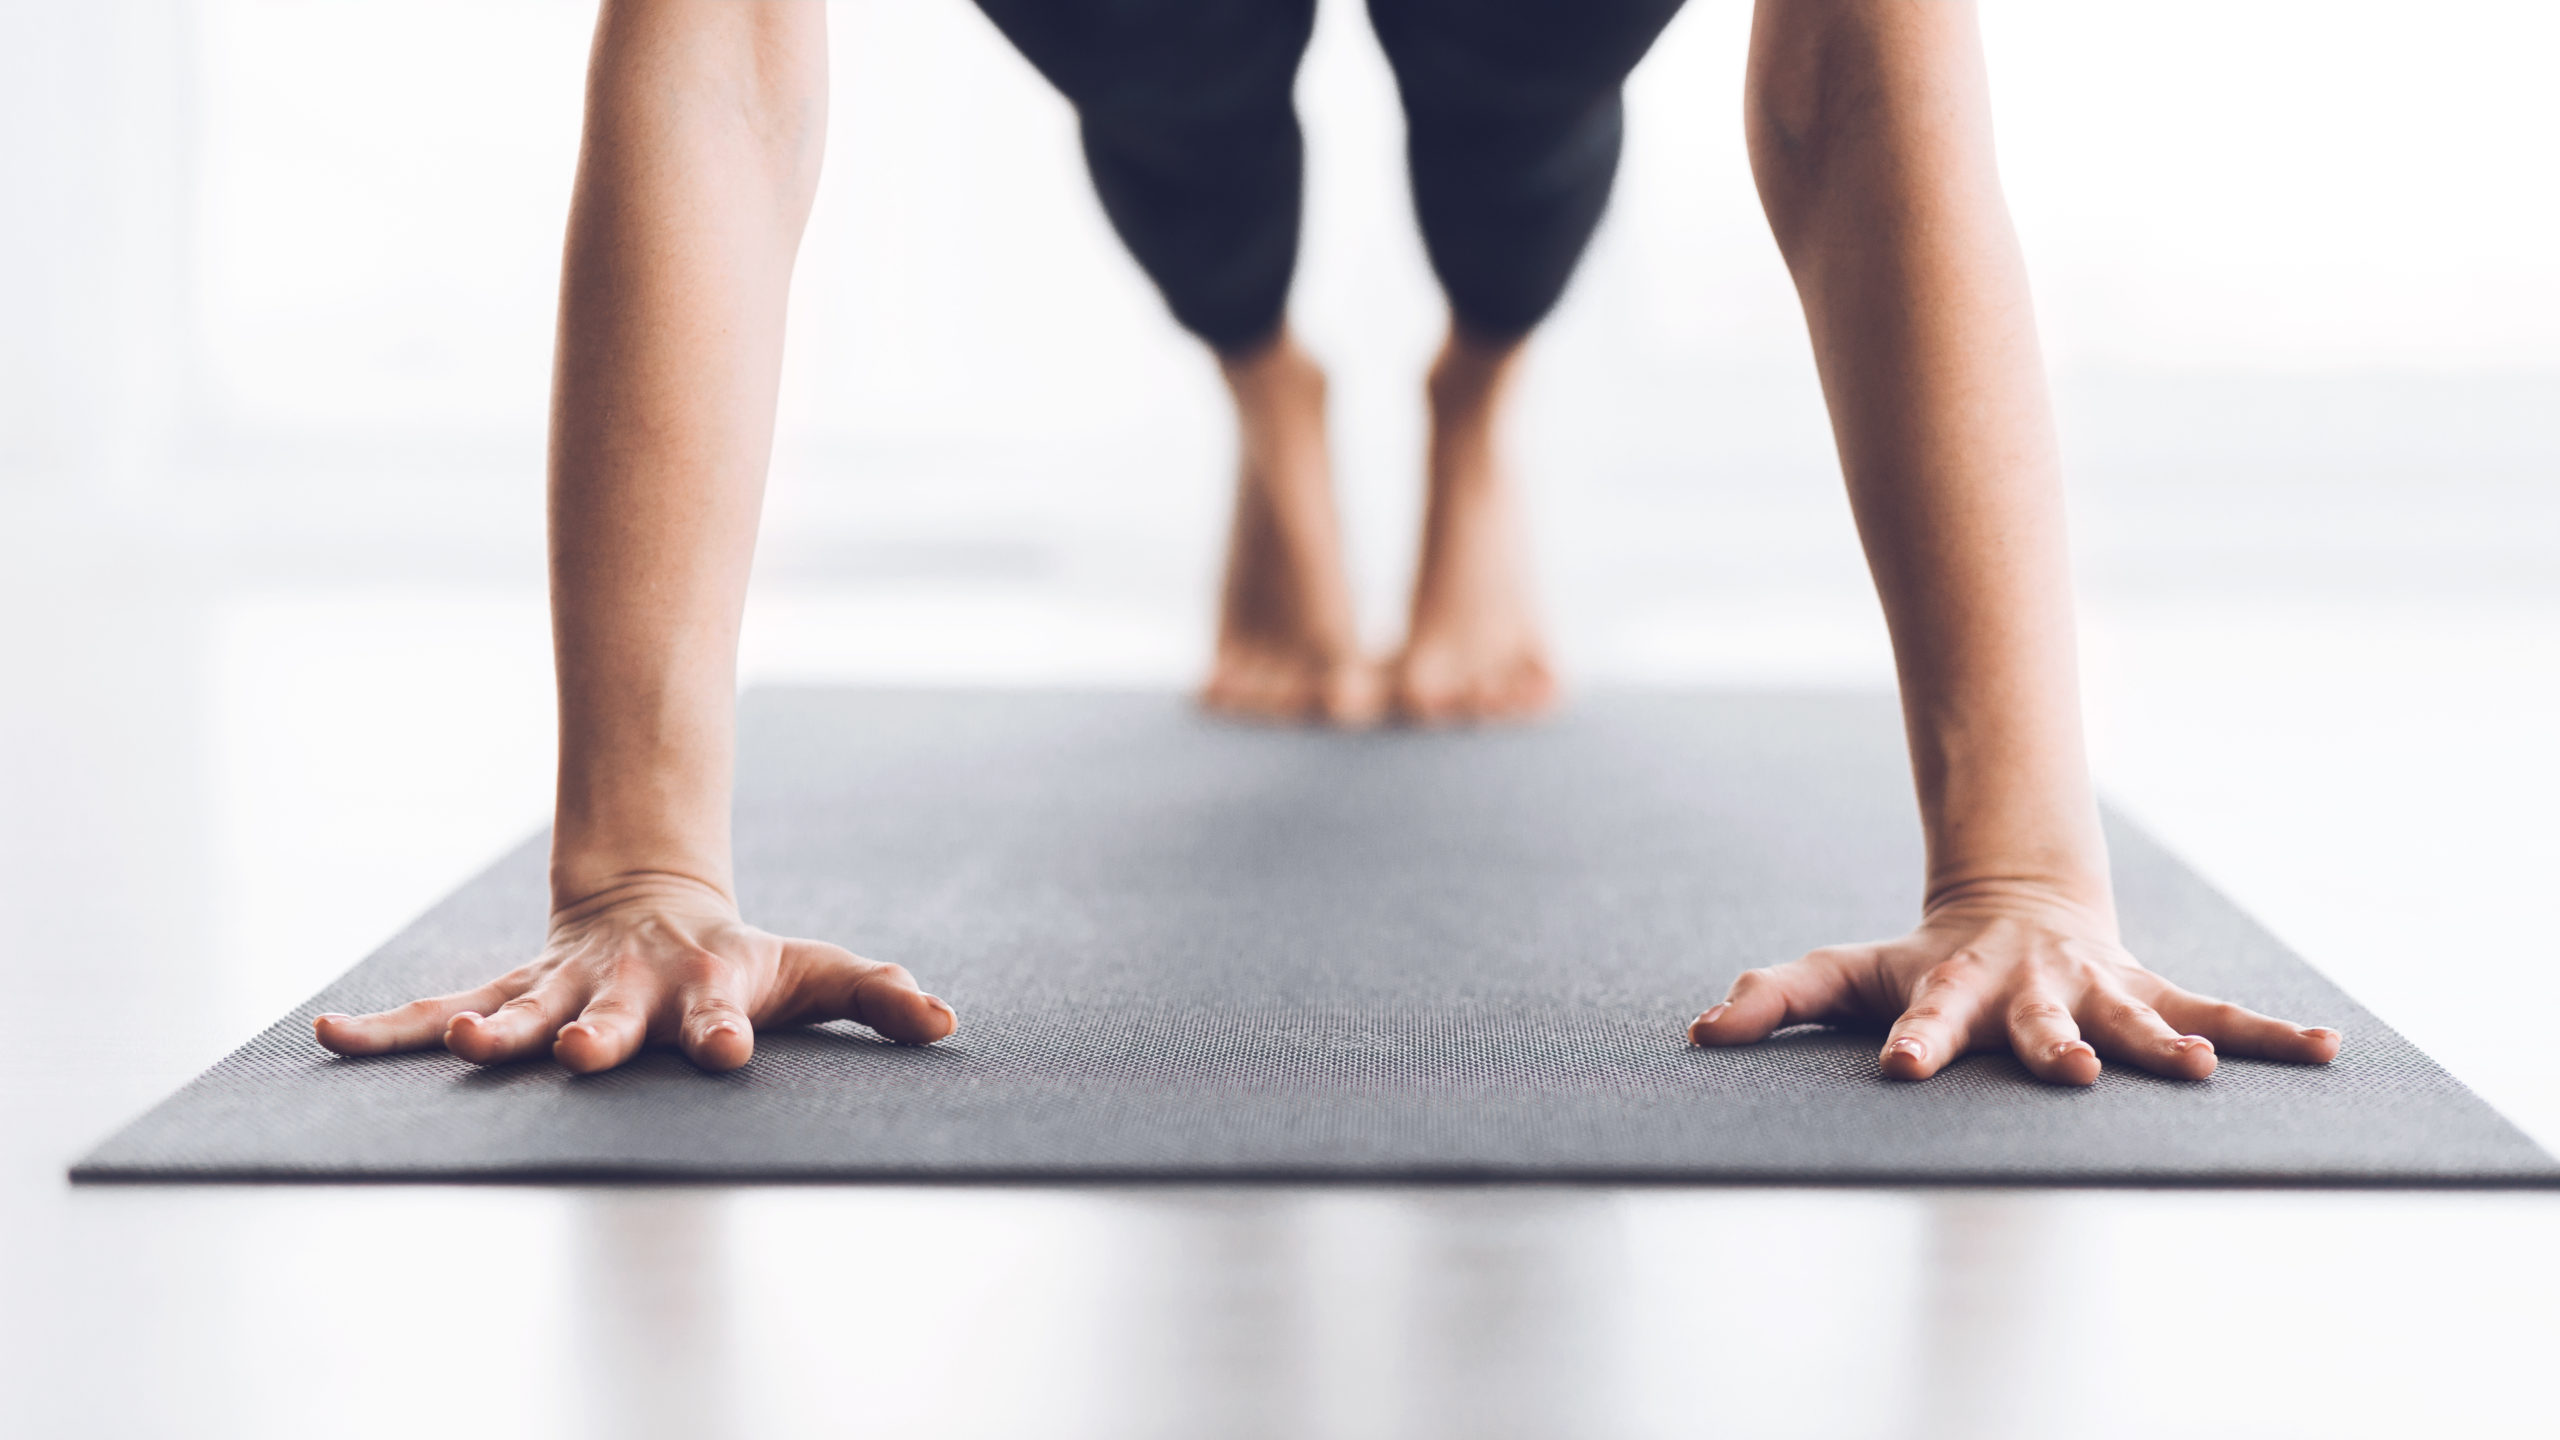 5 Basic Yoga Poses That Will Help You Get Your Namaste On - Anytime Fitness